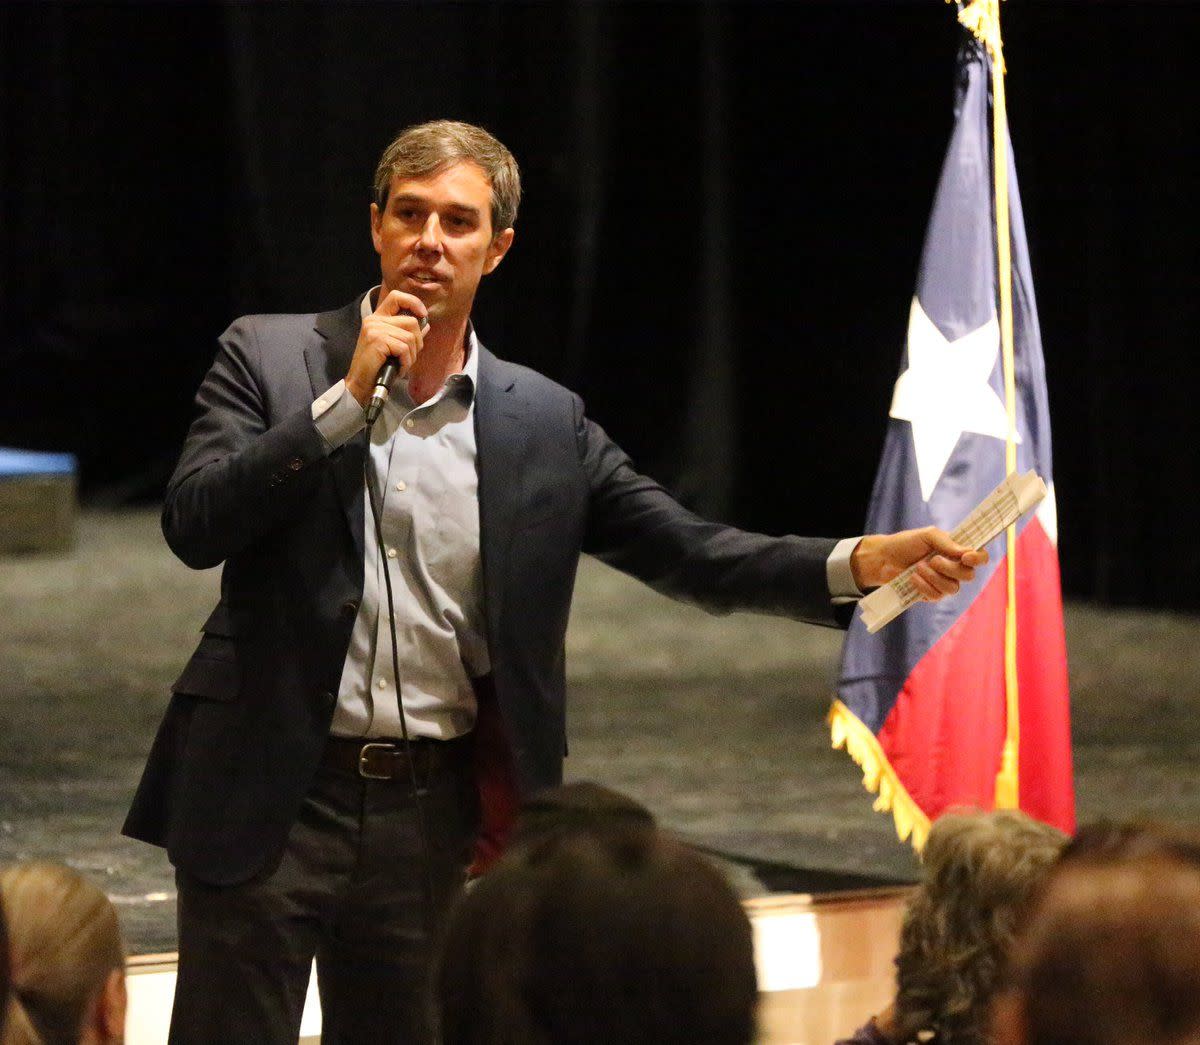 Then-U.S. Rep. Beto O’Rourke speaks at a town hall at Chapin High School in El Paso.